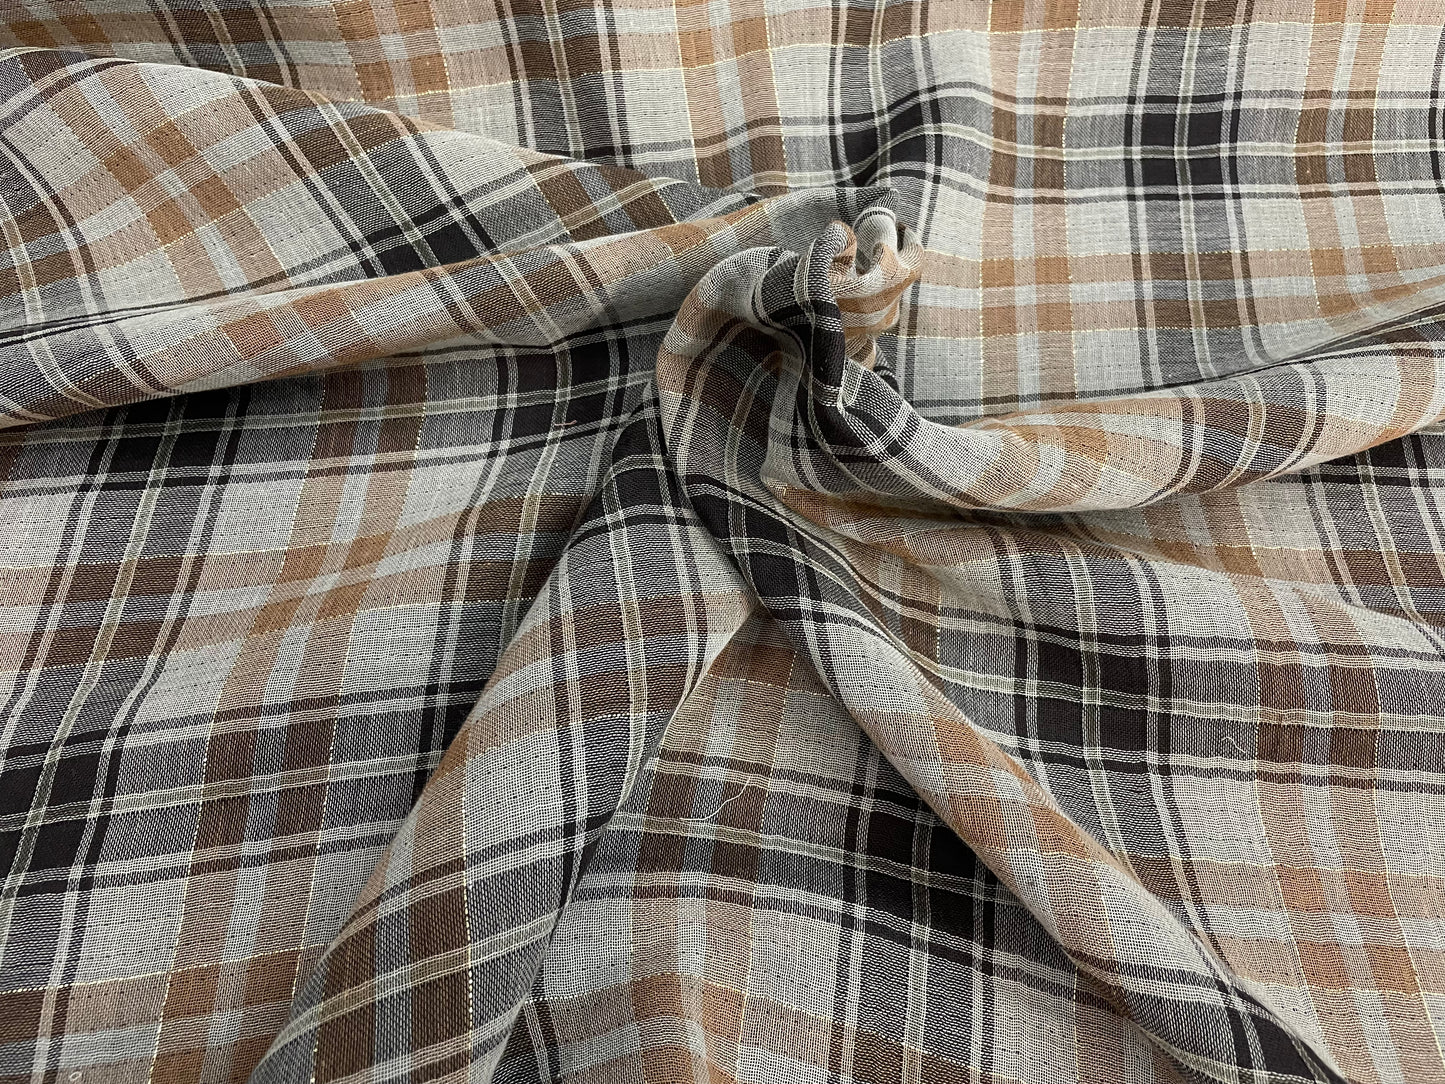 Double Layer Cotton Voile - Plaid - Grey, Brown, Yellow